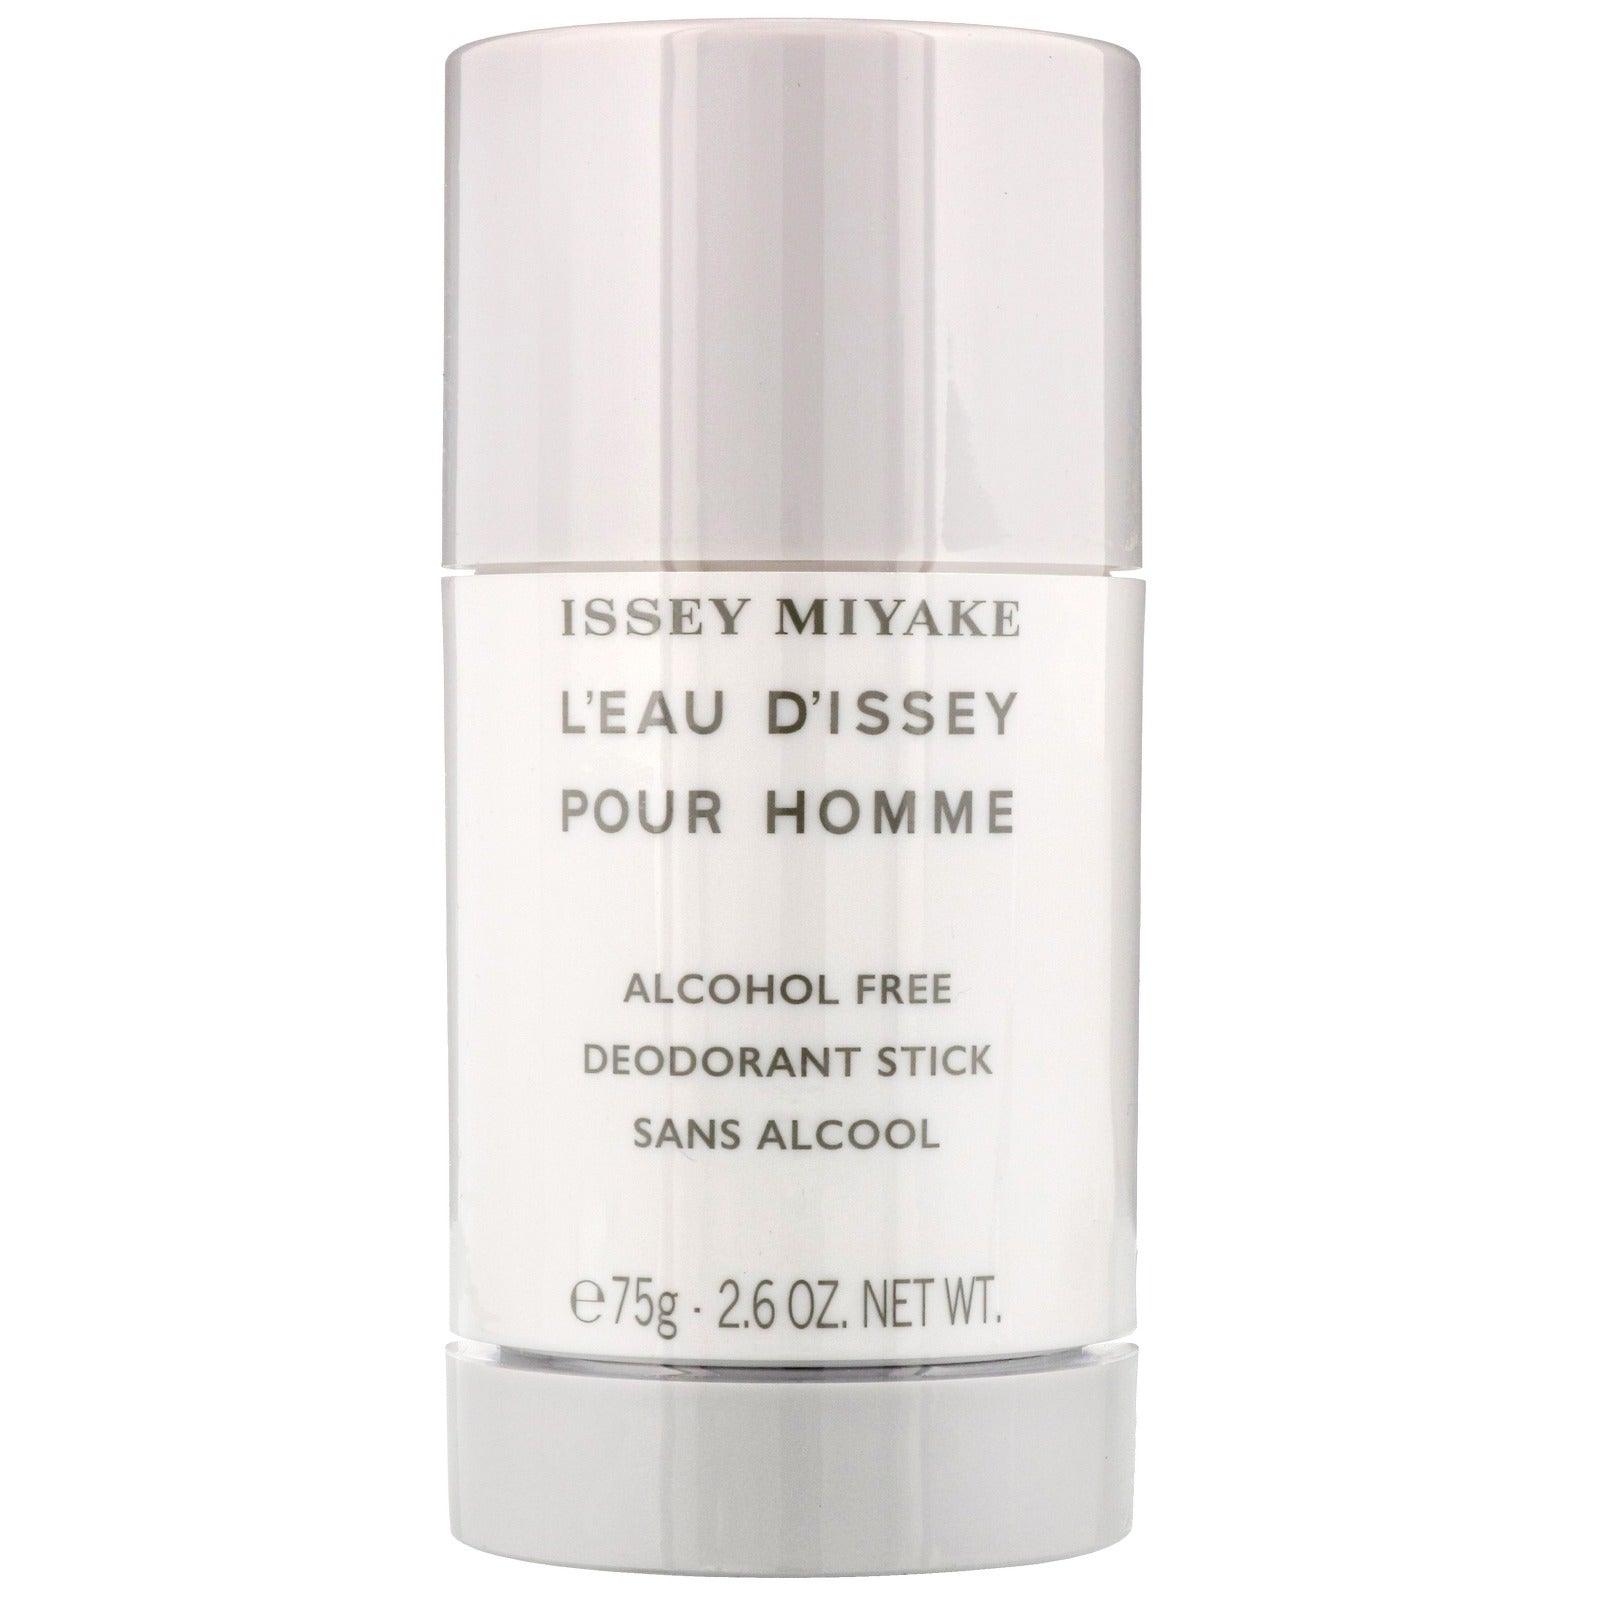 Issey Miyake L'eau D'issey Pour Homme Deo Stick - Parfum Gallerie